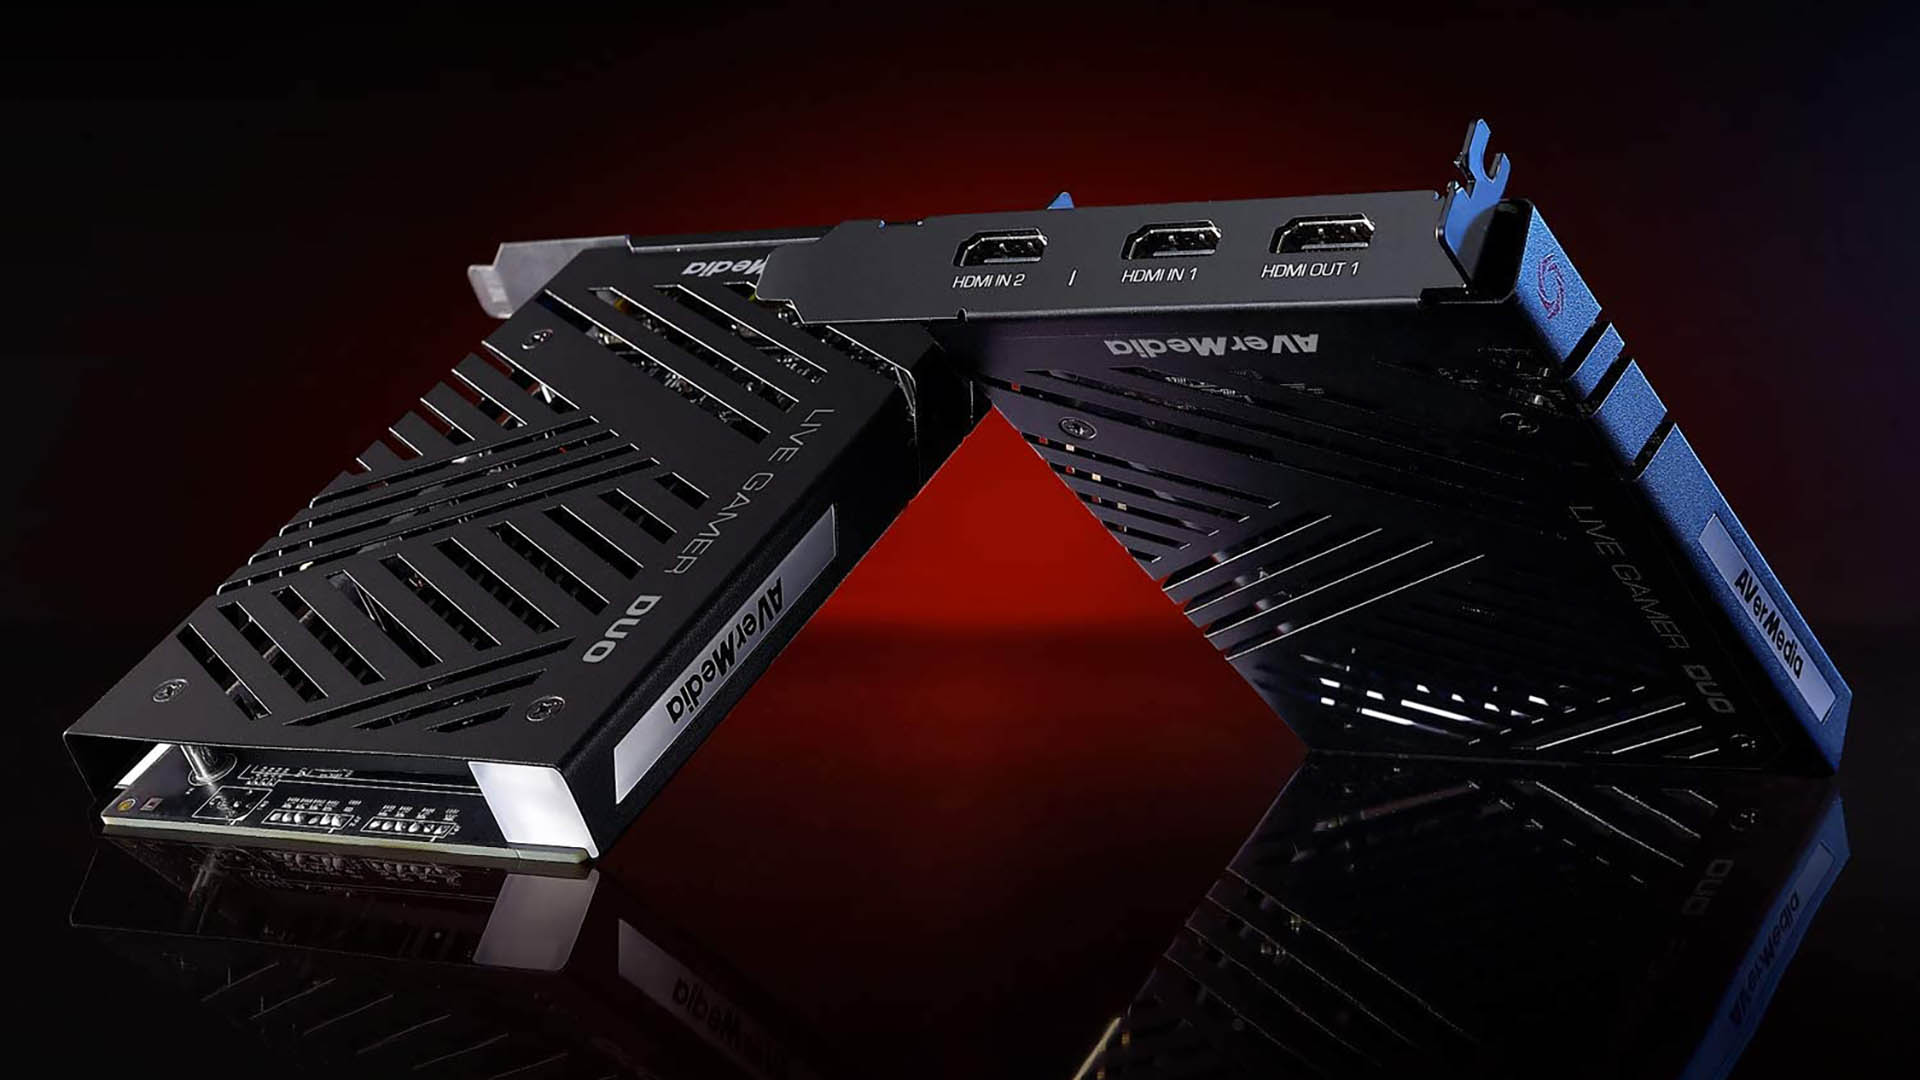 Stylised shot of two Avermedia Live Gamer Duo capture cards leaning on each other on a red and black background